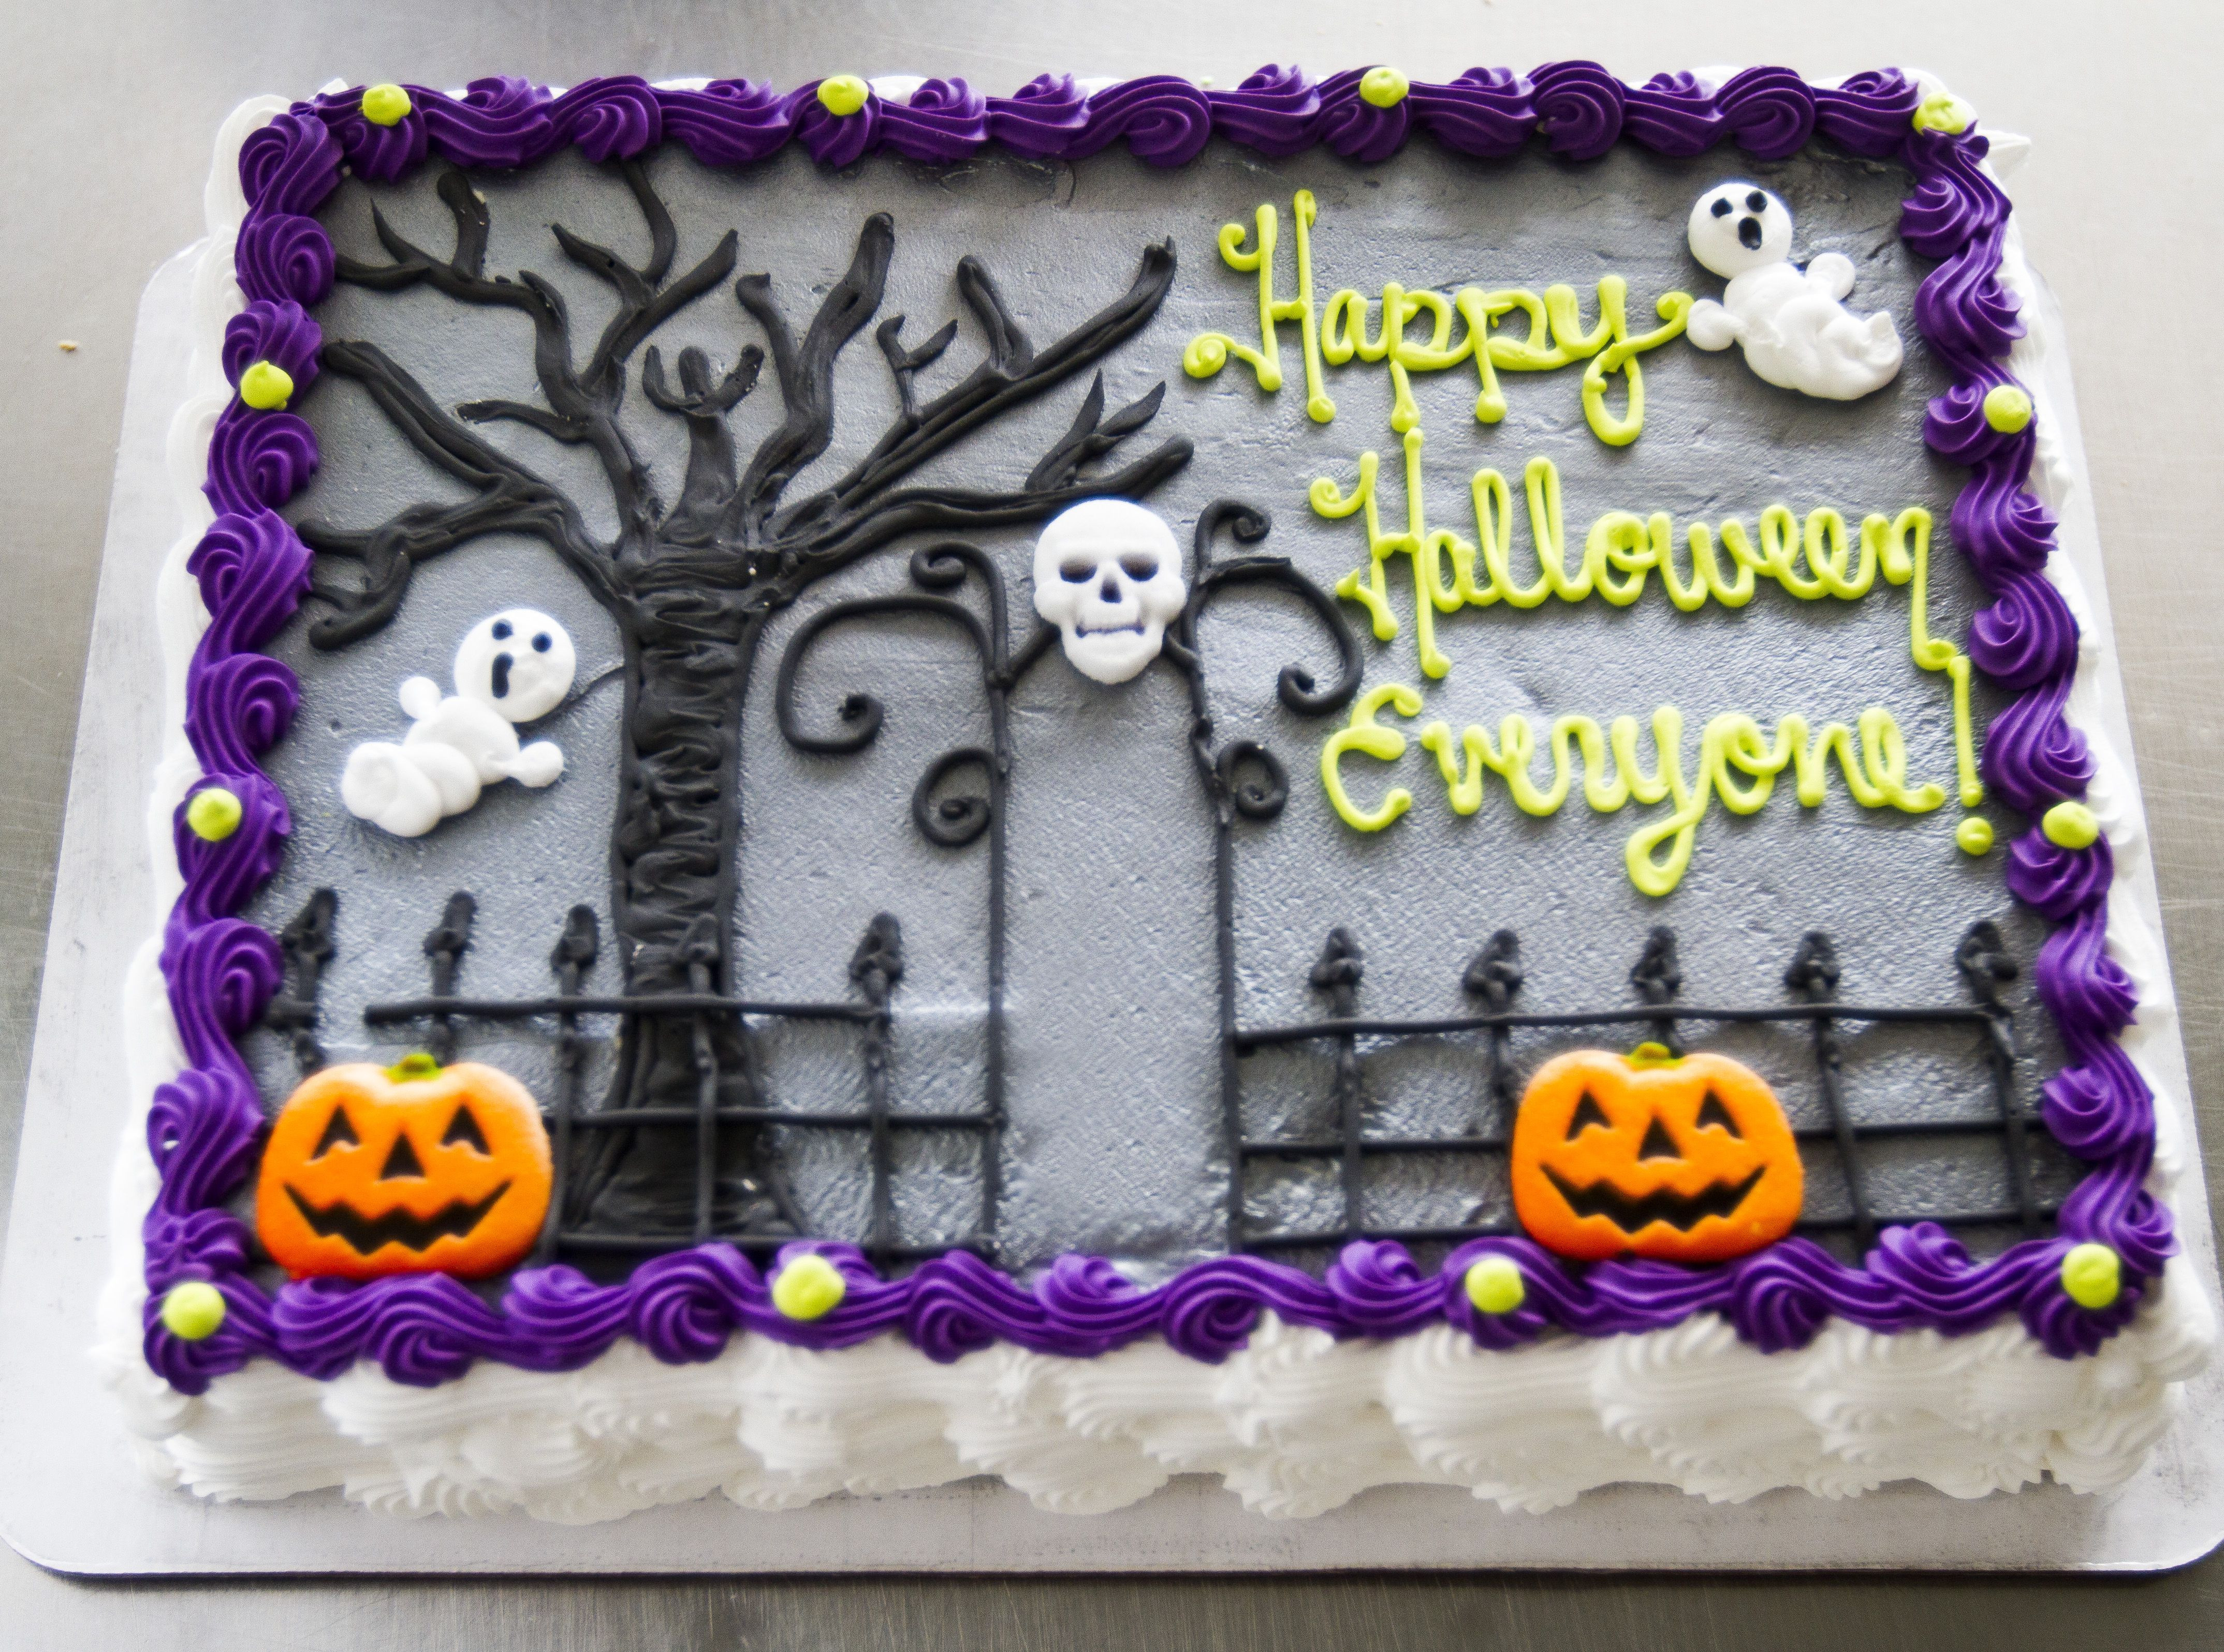 Halloween Birthday Sheet Cakes
 A graveyard cake with ghosts for Halloween Cake 028